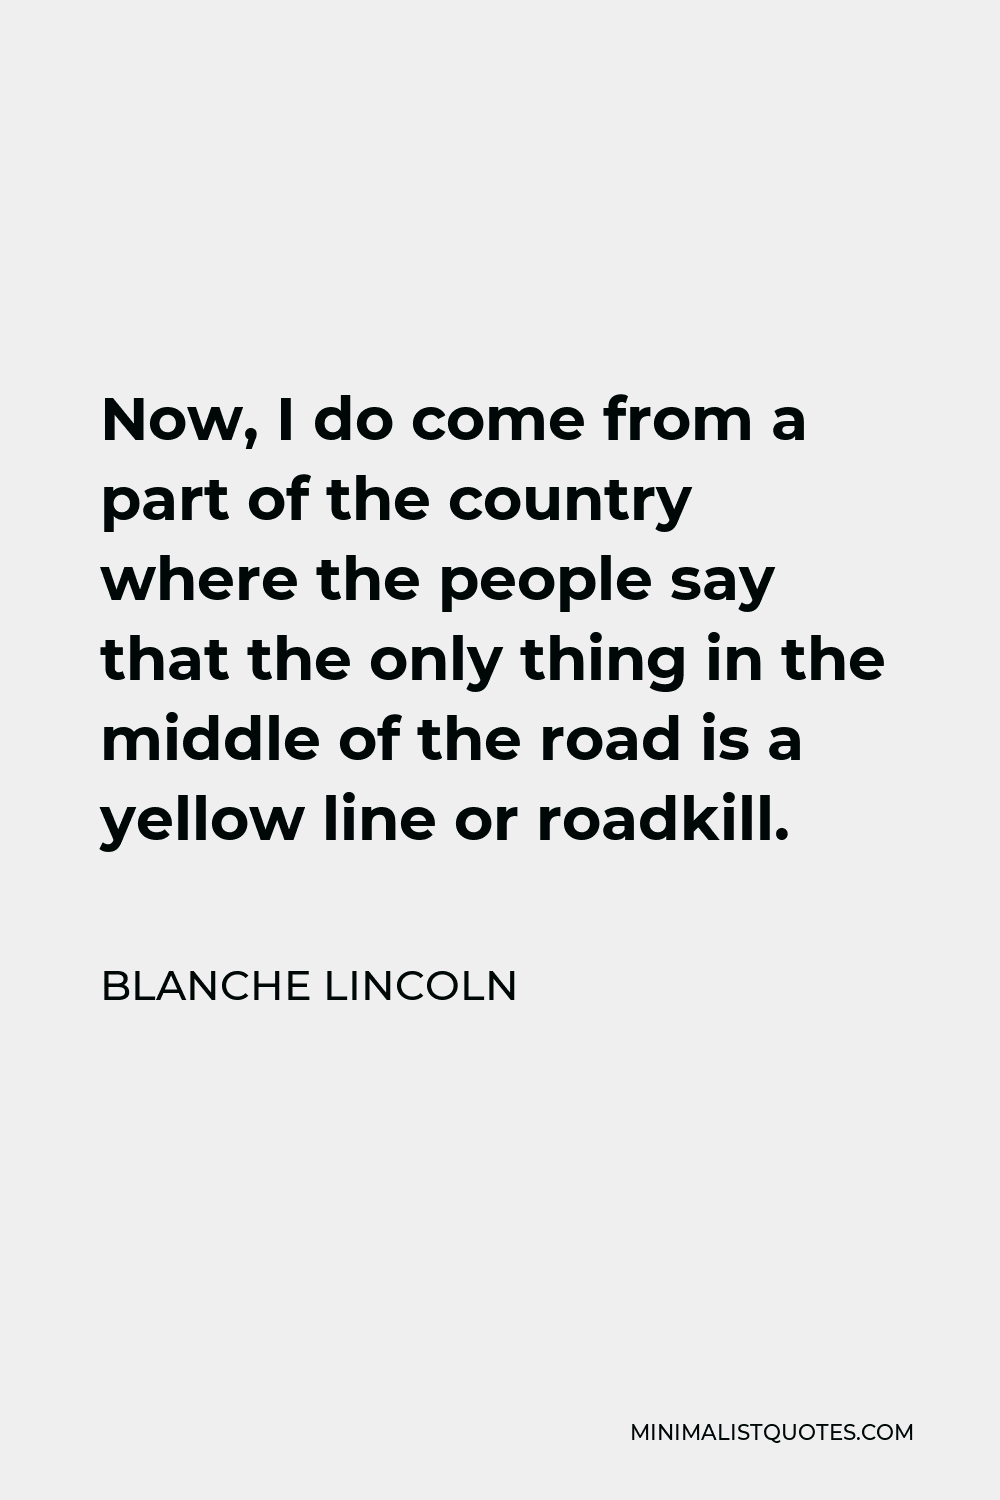 Blanche Lincoln Quote - Now, I do come from a part of the country where the people say that the only thing in the middle of the road is a yellow line or roadkill.